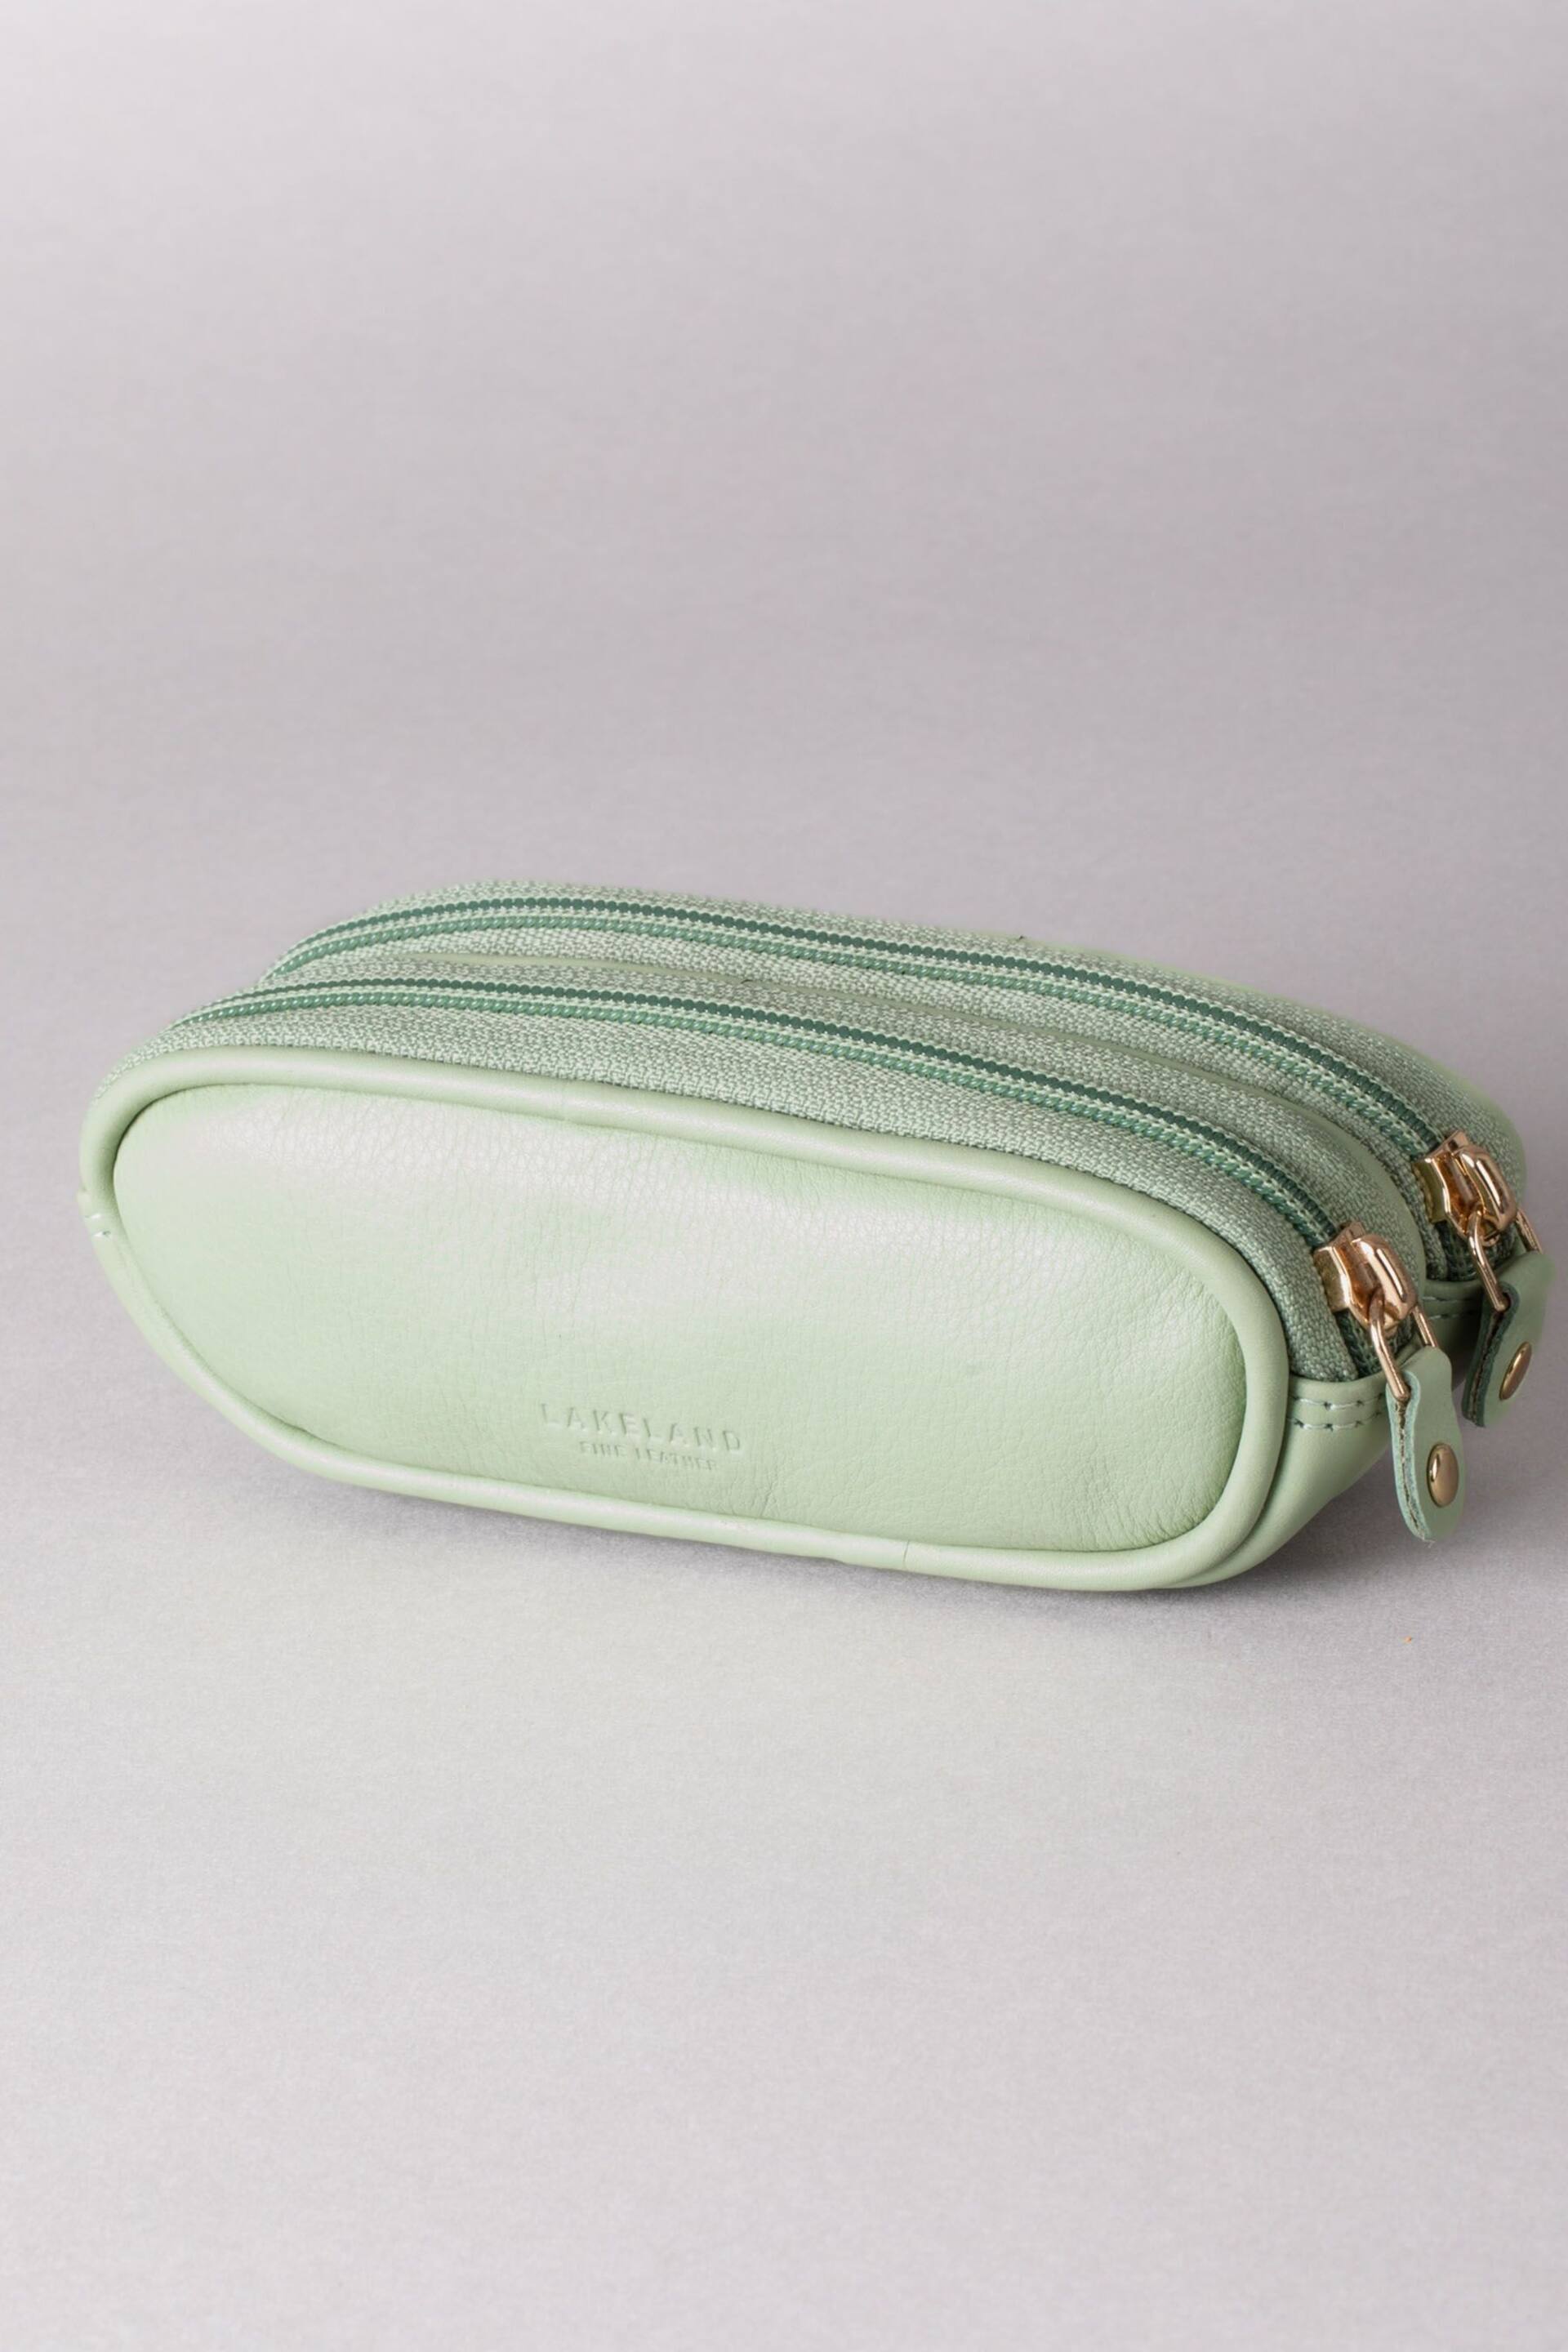 Lakeland Leather Sage Green Leather Double Glasses Case - Image 2 of 5